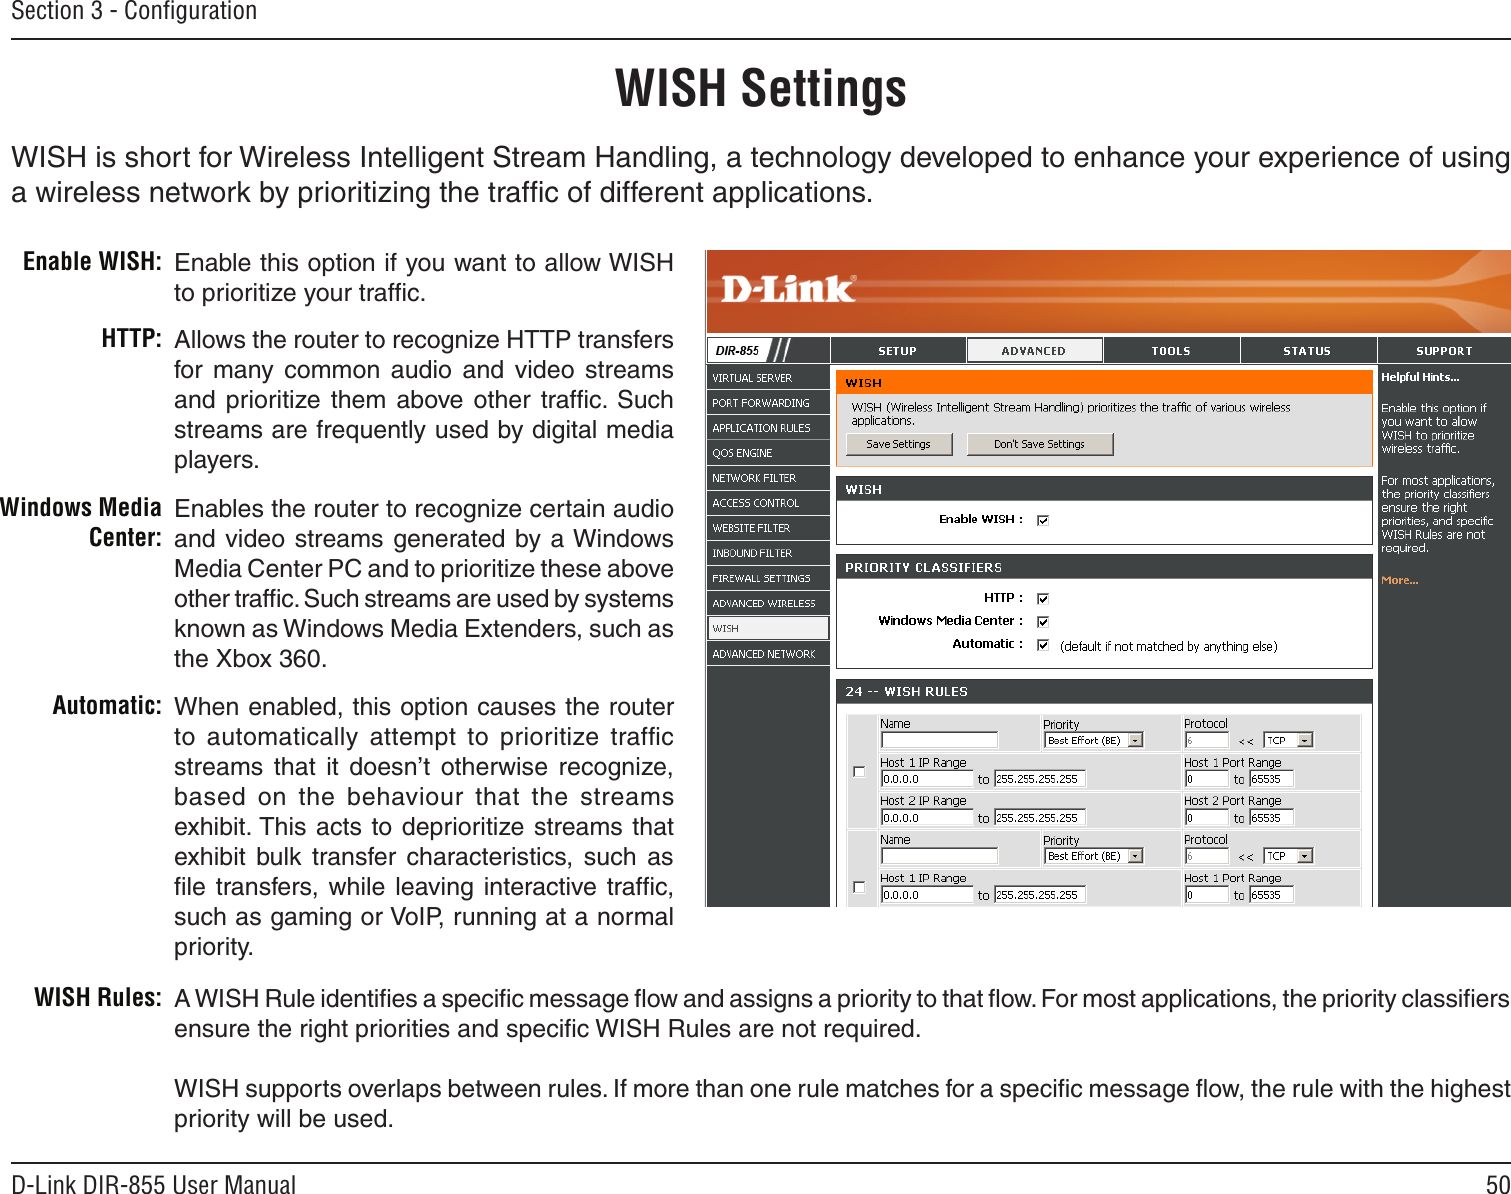 50D-Link DIR-855 User ManualSection 3 - ConﬁgurationWISH SettingsWISH is short for Wireless Intelligent Stream Handling, a technology developed to enhance your experience of using a wireless network by prioritizing the trafﬁc of different applications. Enable this option if you want to allow WISH to prioritize your trafﬁc. Enable WISH:Allows the router to recognize HTTP transfers for  many  common  audio  and  video  streams and  prioritize them  above  other  trafﬁc.  Such streams are frequently used by digital media players. HTTP:Enables the router to recognize certain audio and video streams generated by a Windows Media Center PC and to prioritize these above other trafﬁc. Such streams are used by systems known as Windows Media Extenders, such as the Xbox 360. Windows Media Center:When enabled, this option causes the router to  automatically  attempt  to  prioritize  trafﬁc streams  that  it  doesn’t  otherwise  recognize, based  on  the  behaviour  that  the  streams exhibit. This acts to deprioritize streams  that exhibit  bulk transfer  characteristics,  such  as ﬁle transfers, while leaving interactive trafﬁc, such as gaming or VoIP, running at a normal priority.Automatic:WISH Rules: A WISH Rule identiﬁes a speciﬁc message ﬂow and assigns a priority to that ﬂow. For most applications, the priority classiﬁers ensure the right priorities and speciﬁc WISH Rules are not required. WISH supports overlaps between rules. If more than one rule matches for a speciﬁc message ﬂow, the rule with the highest priority will be used. 